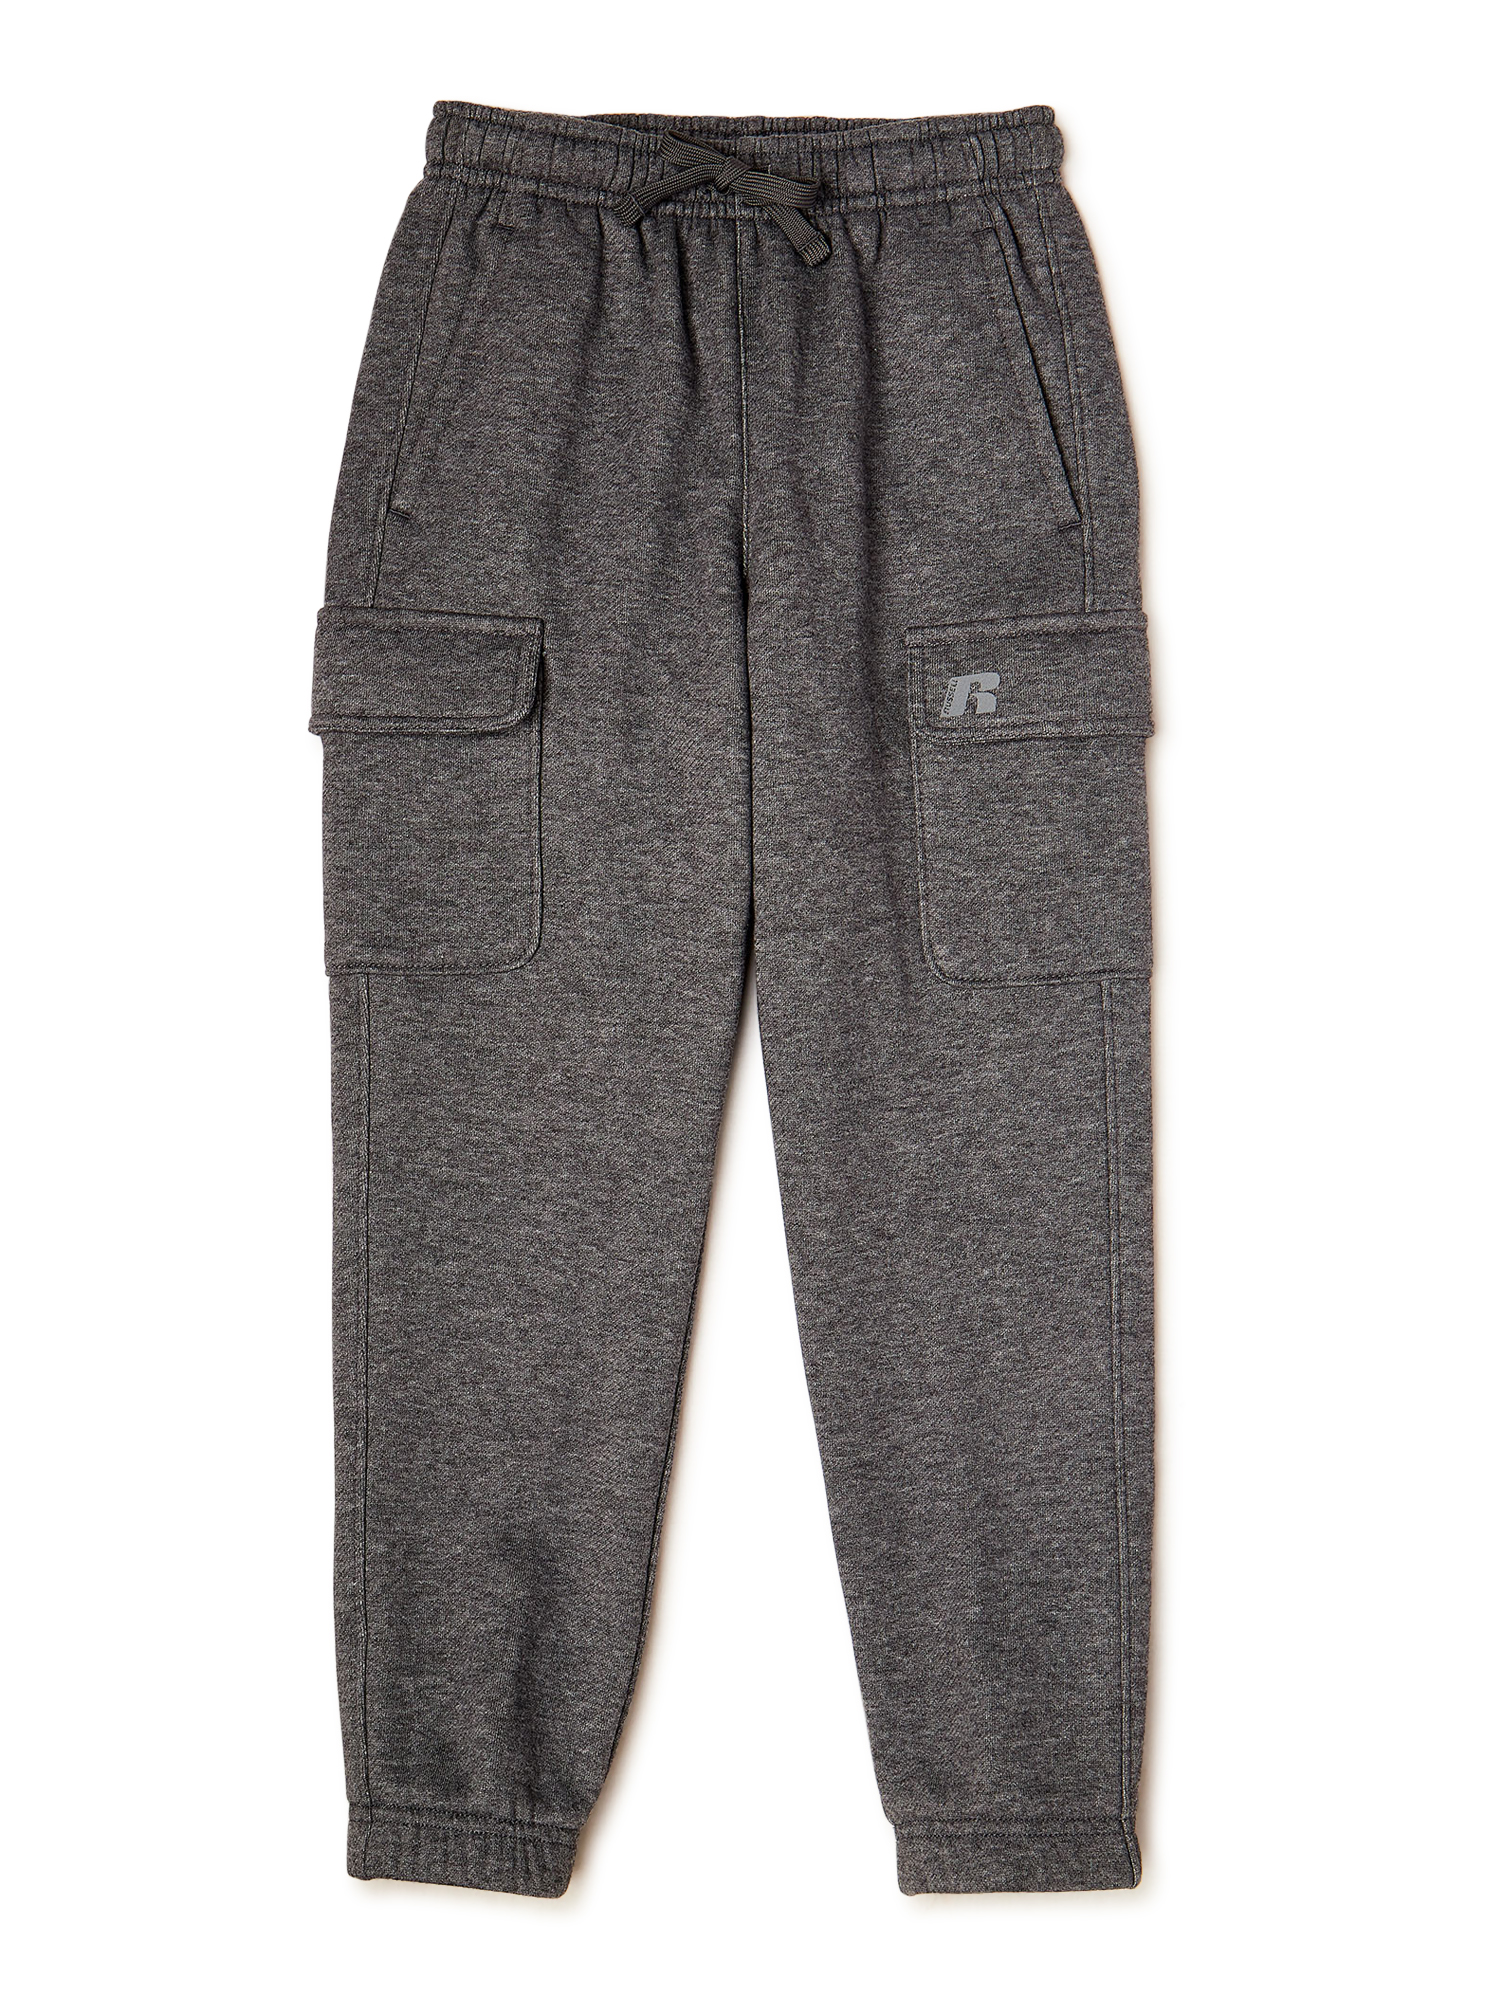 Russell Boys Athletic Cargo Pants, Sizes 4-18 & Husky - image 1 of 3